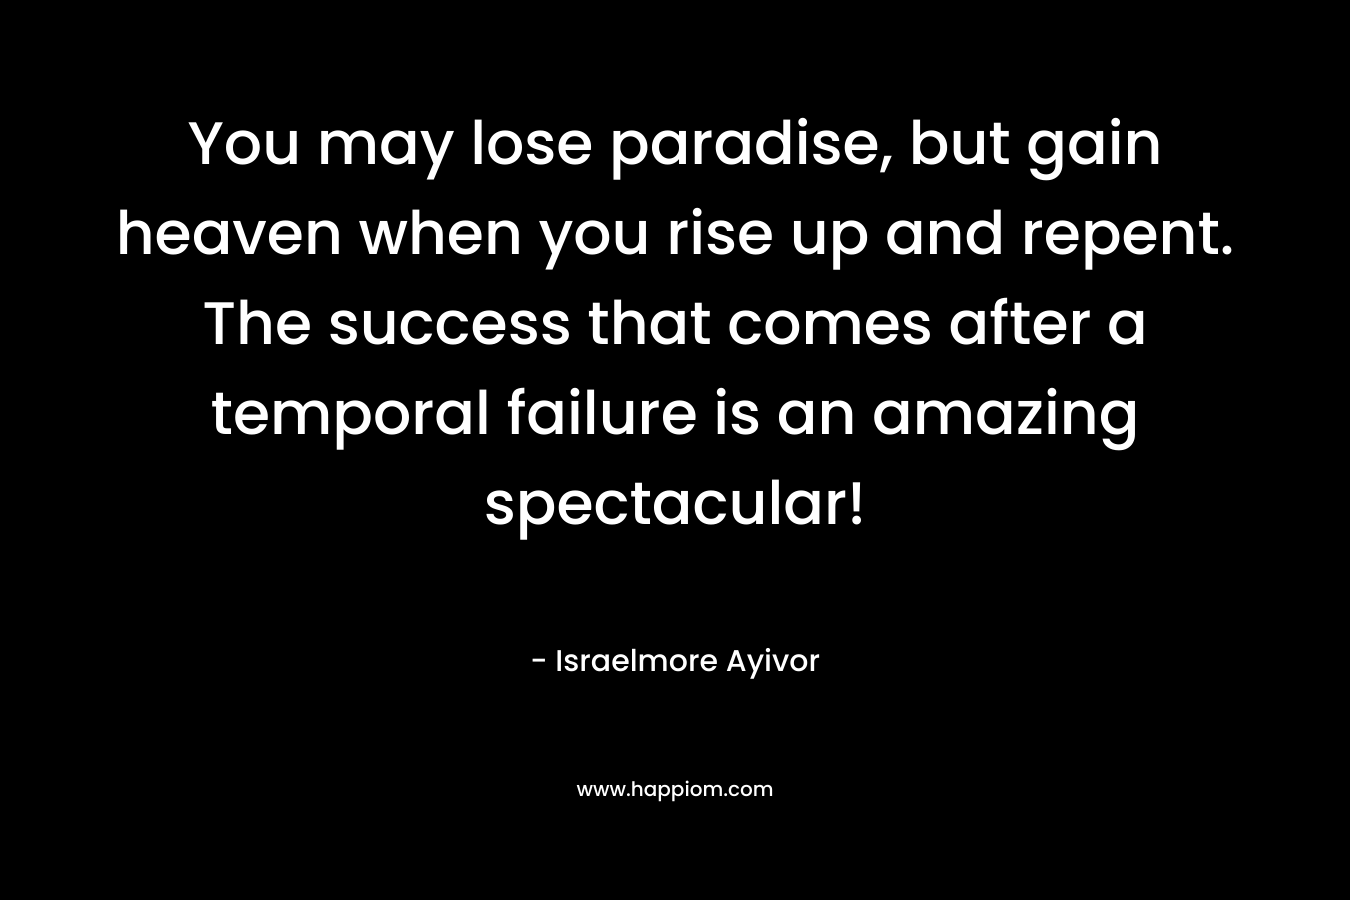 You may lose paradise, but gain heaven when you rise up and repent. The success that comes after a temporal failure is an amazing spectacular!